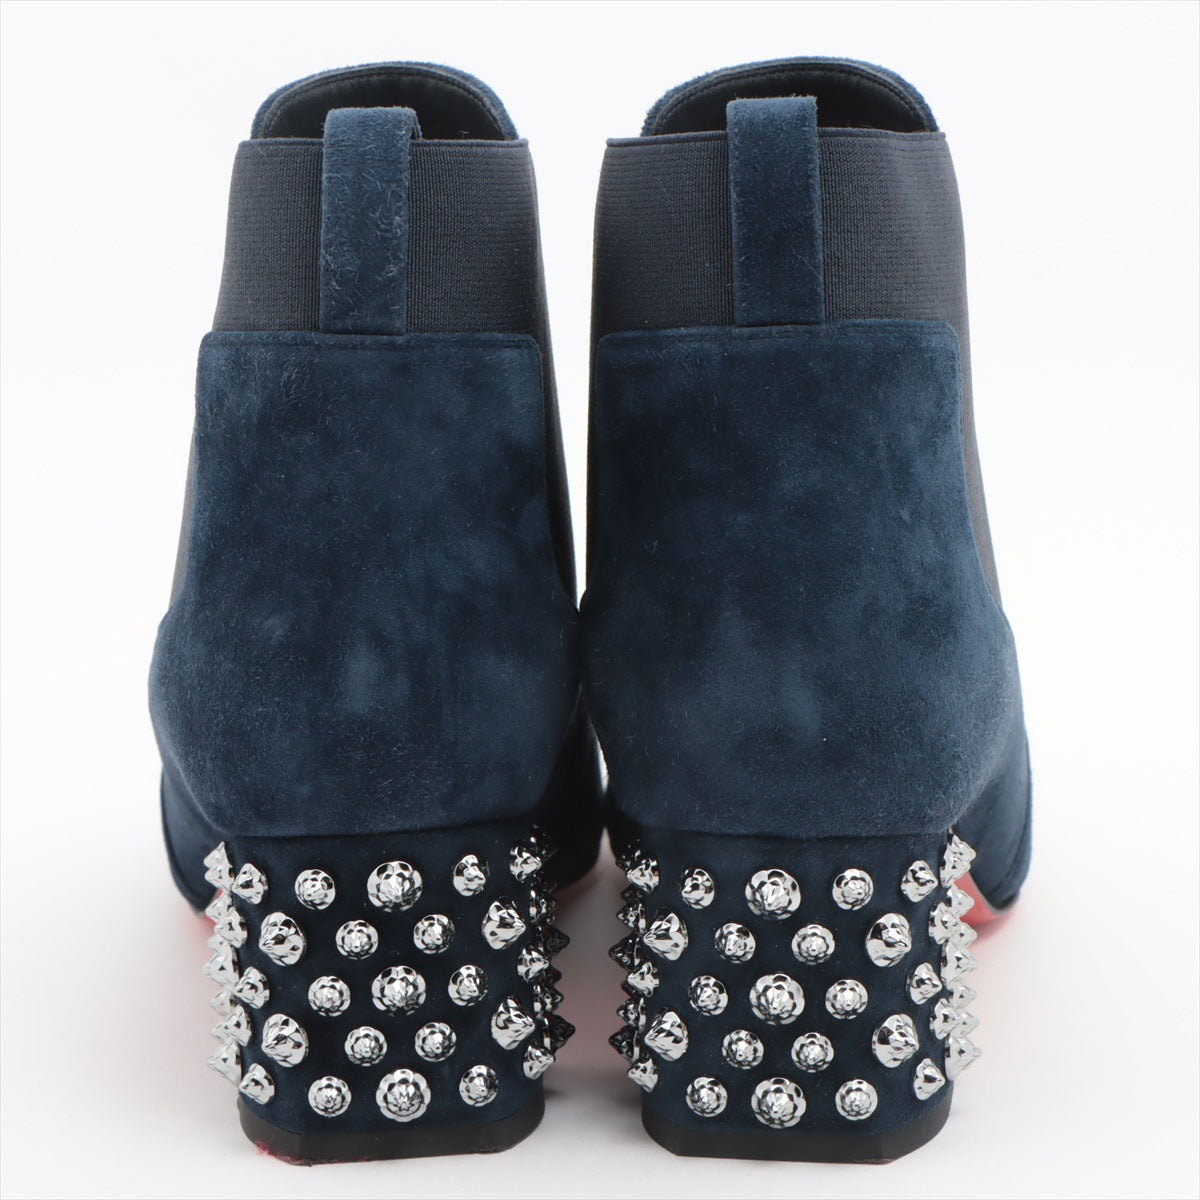 Christian Louboutin Leather & suede Boots 38 1/2 Ladies' Navy blue STUDY Studs